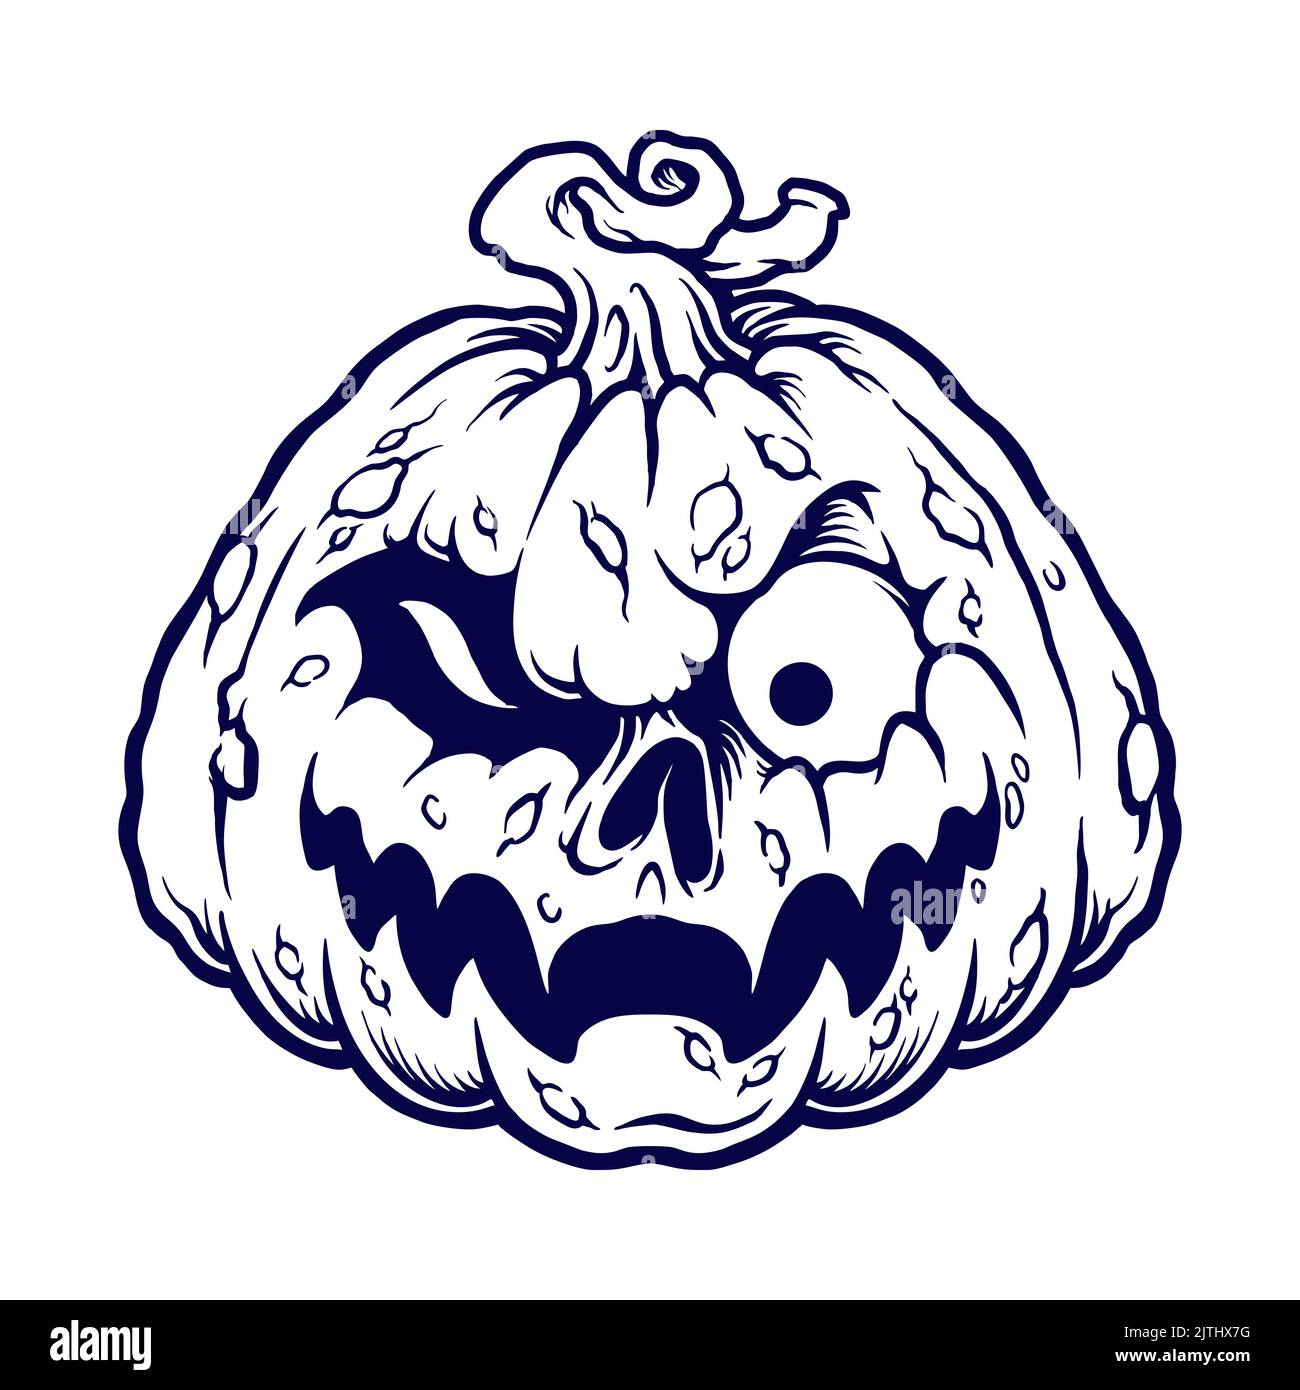 Creepy Halloween Pumpkins Carved Silhouette Vector illustrations for your work Logo, mascot merchandise t-shirt, stickers and Label designs, poster, g Stock Photo